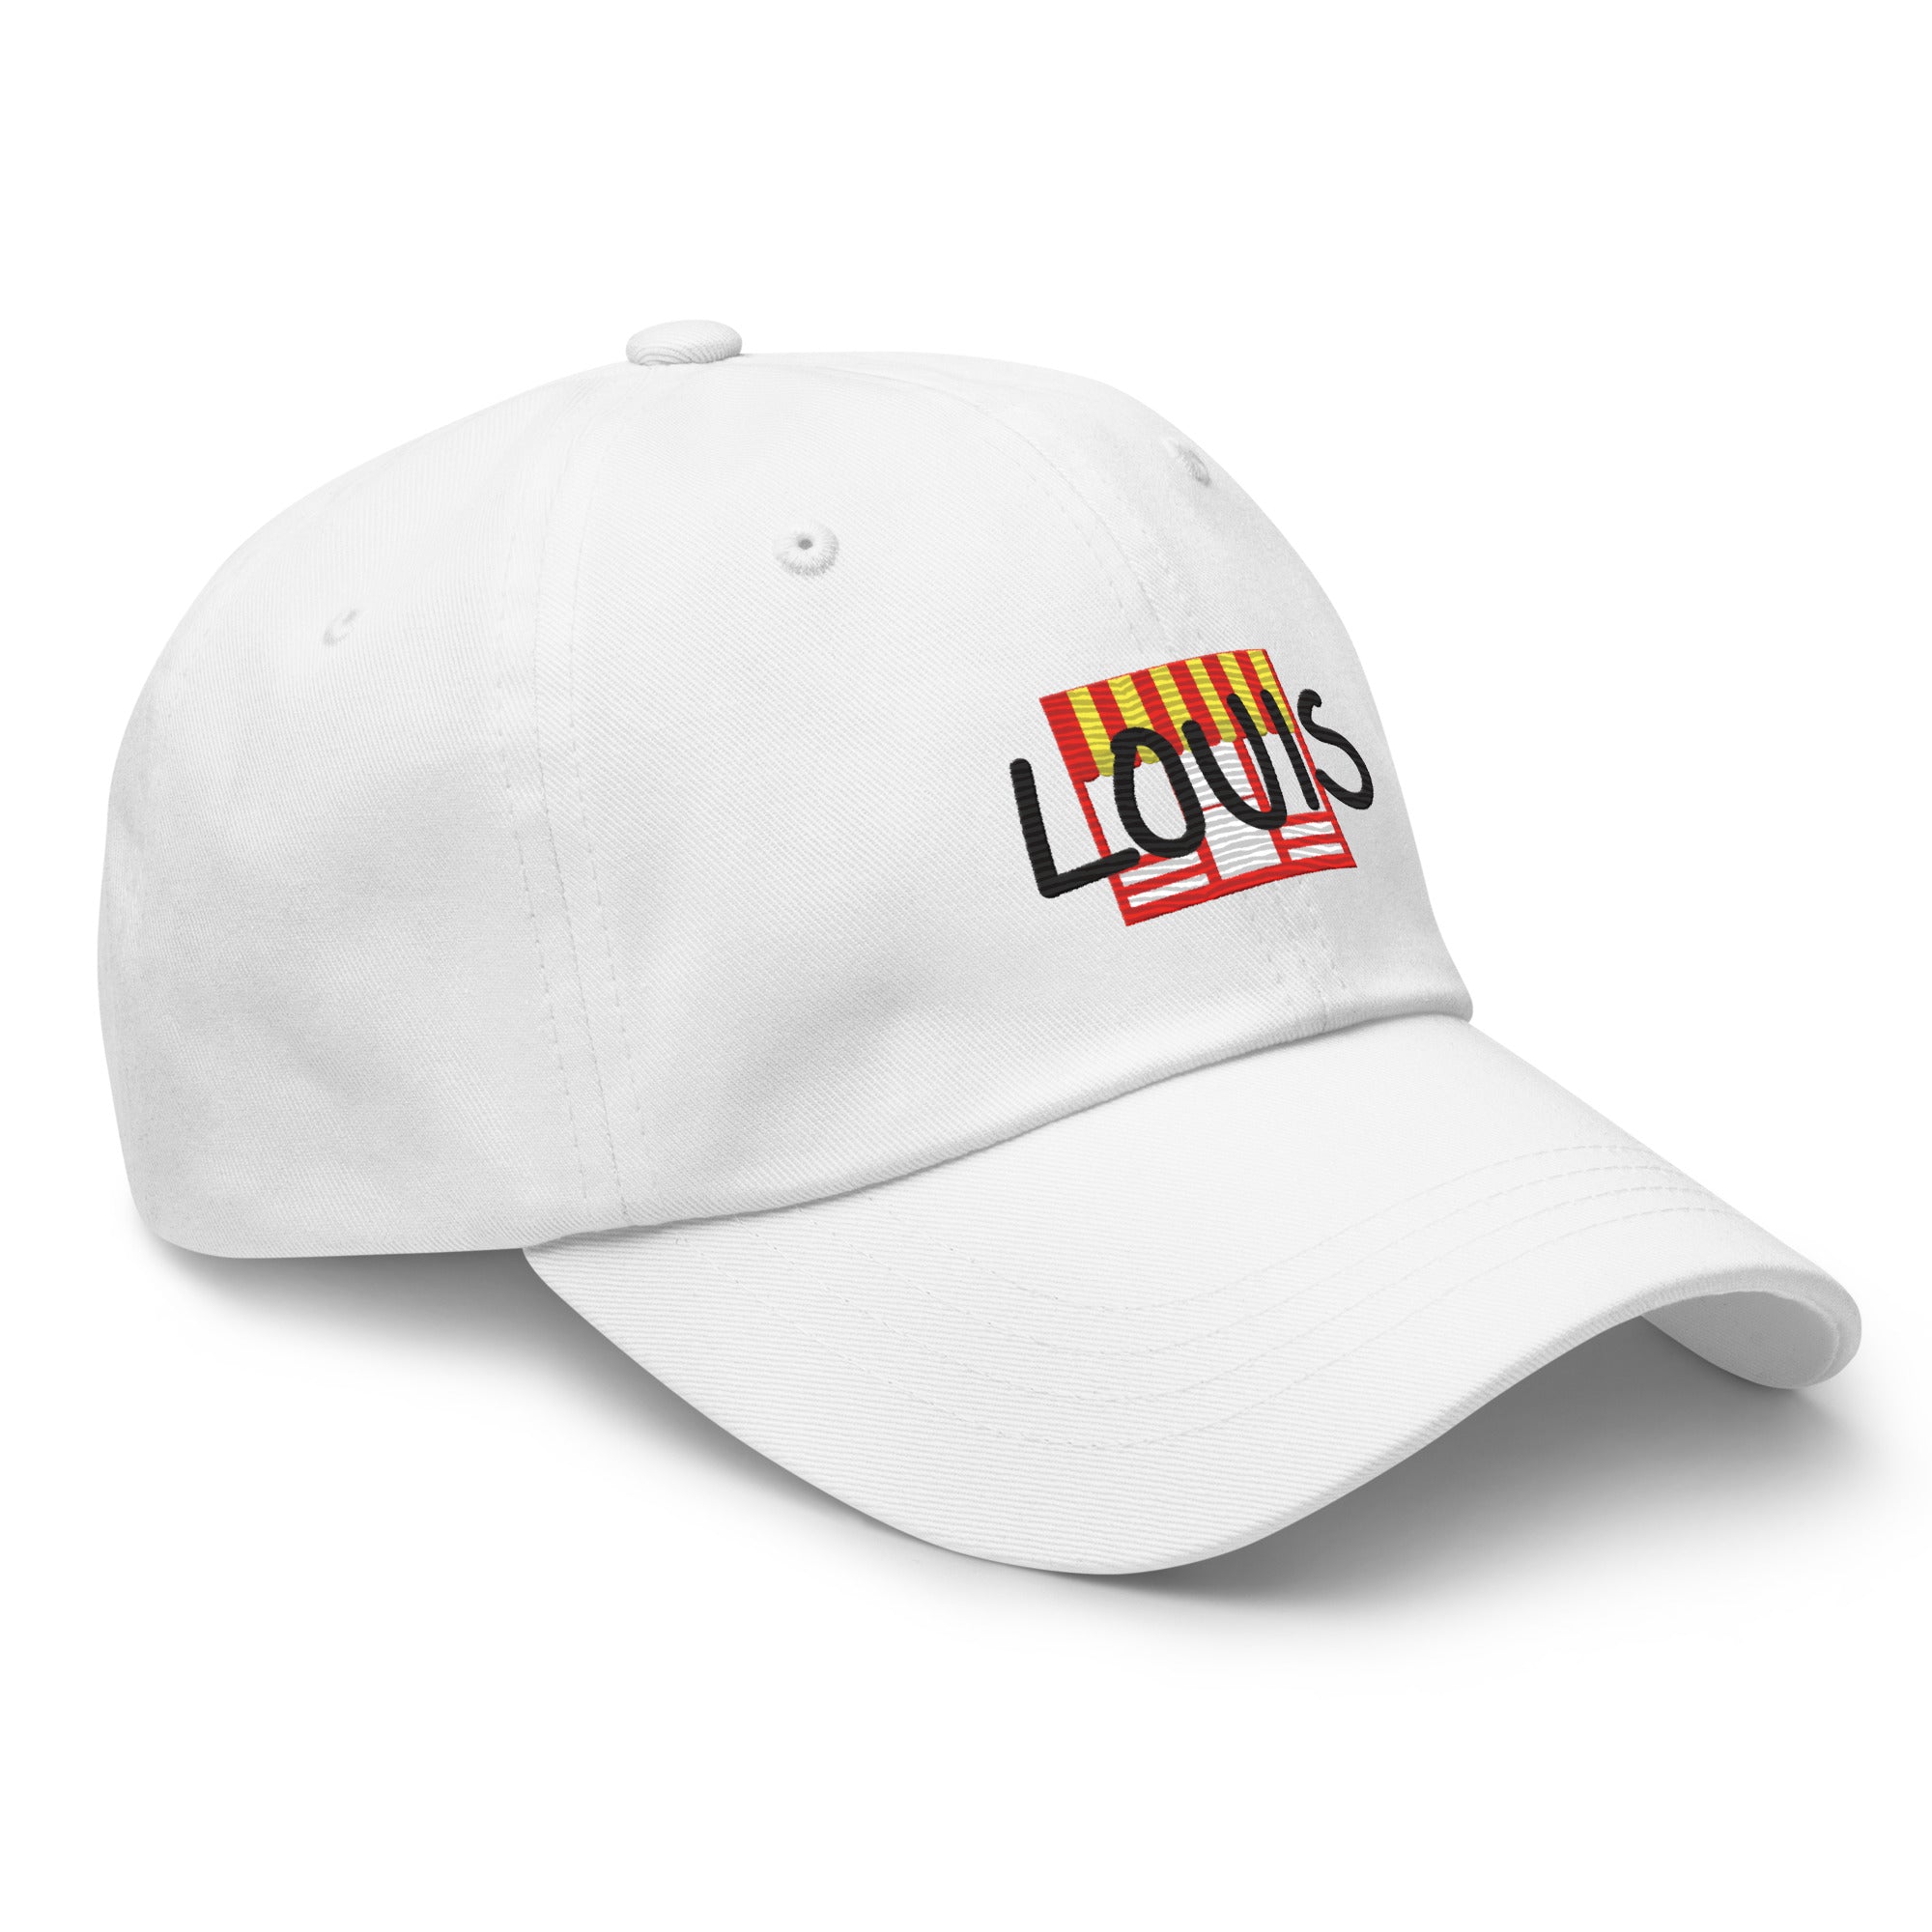 classic-dad-hat-white-right-front-64cfb3d874a71.jpg